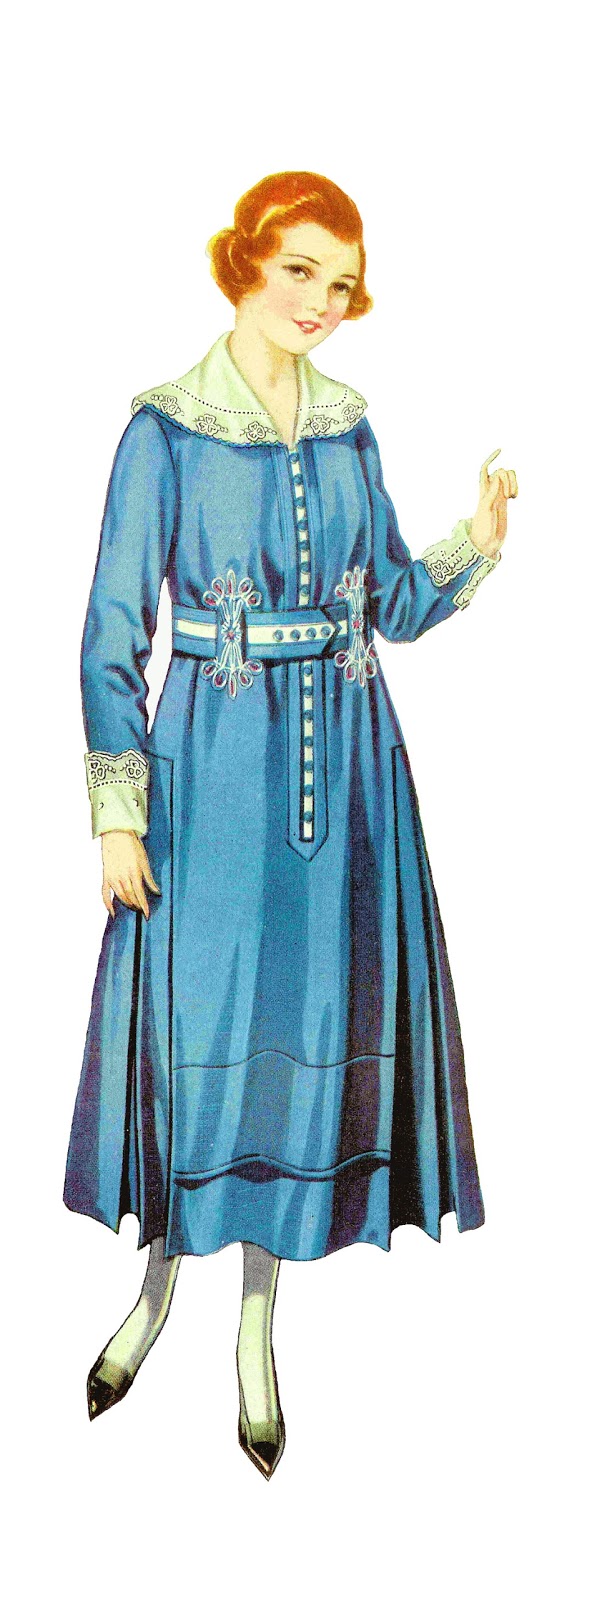 clipart women's clothing - photo #16